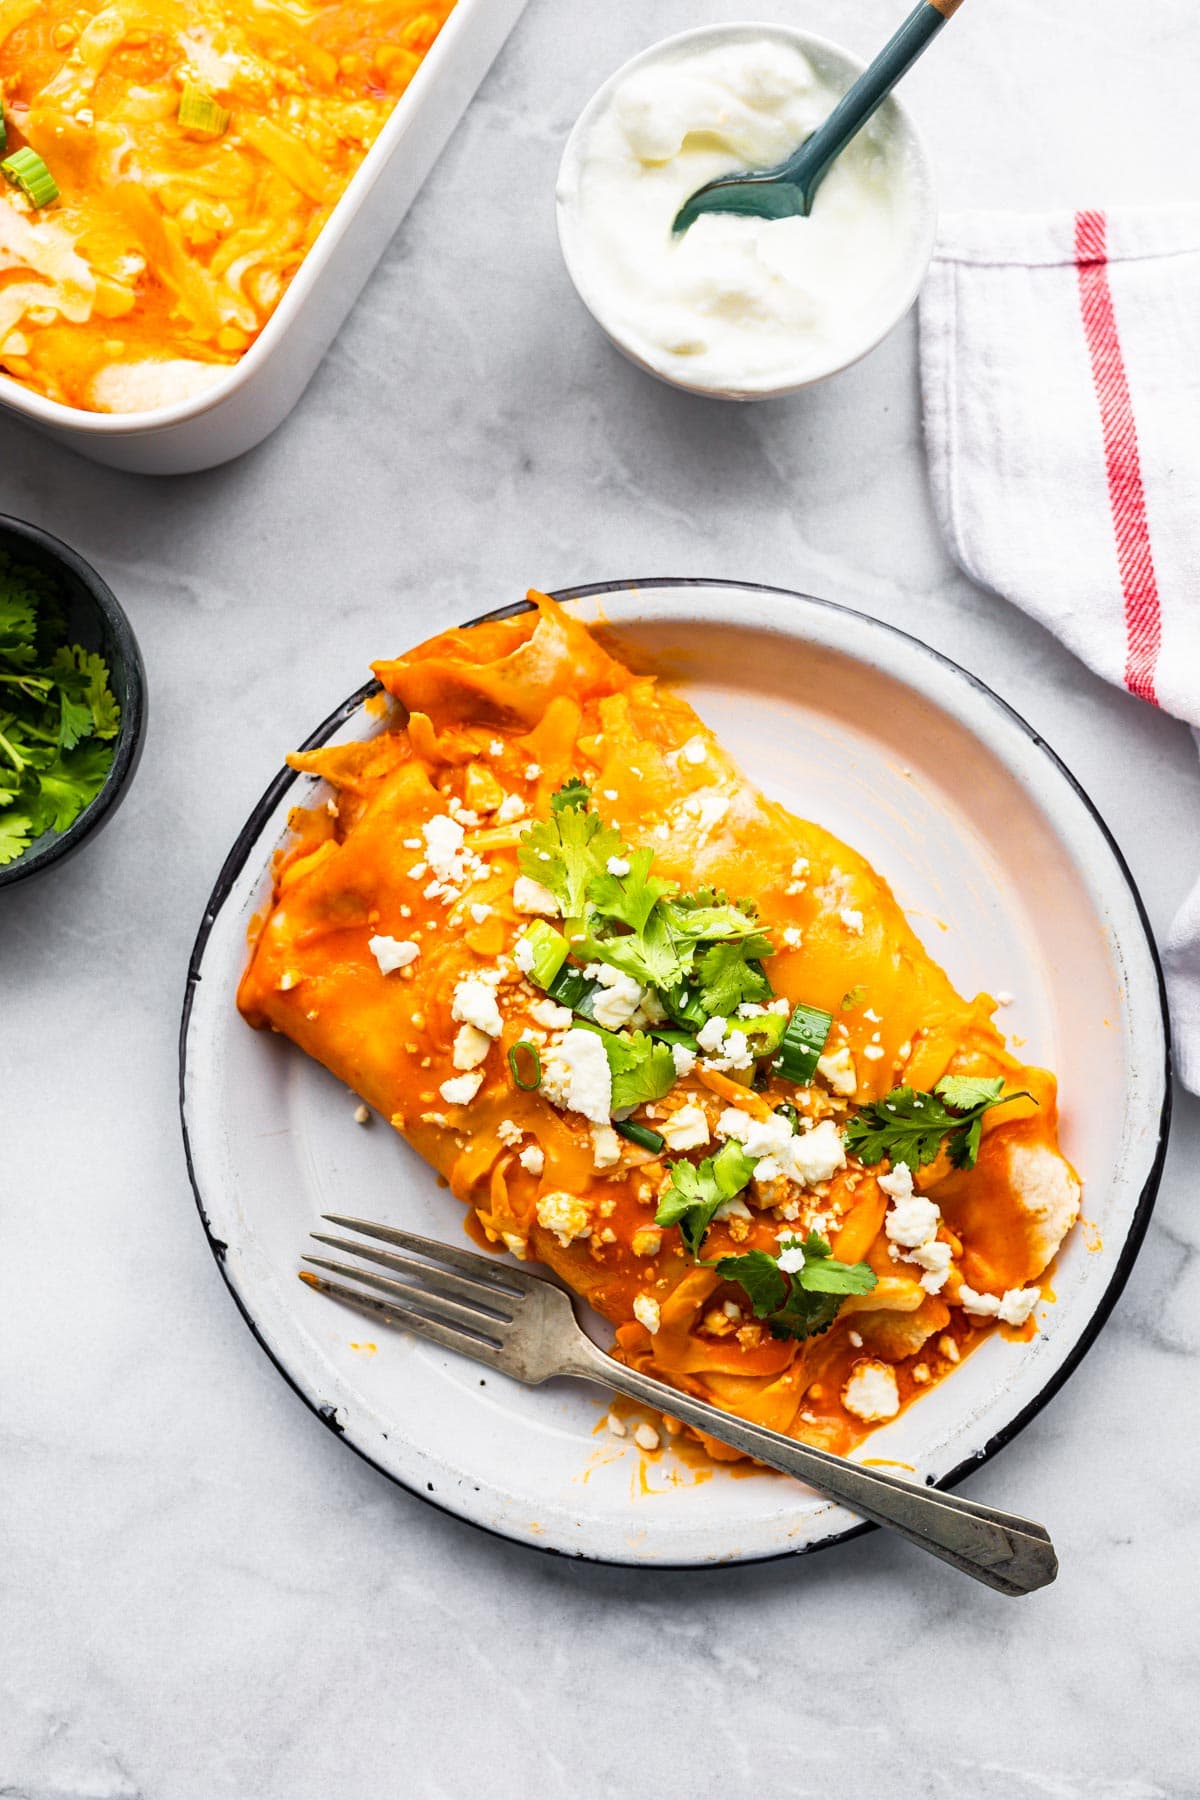 buffalo style enchiladas on plate with fork